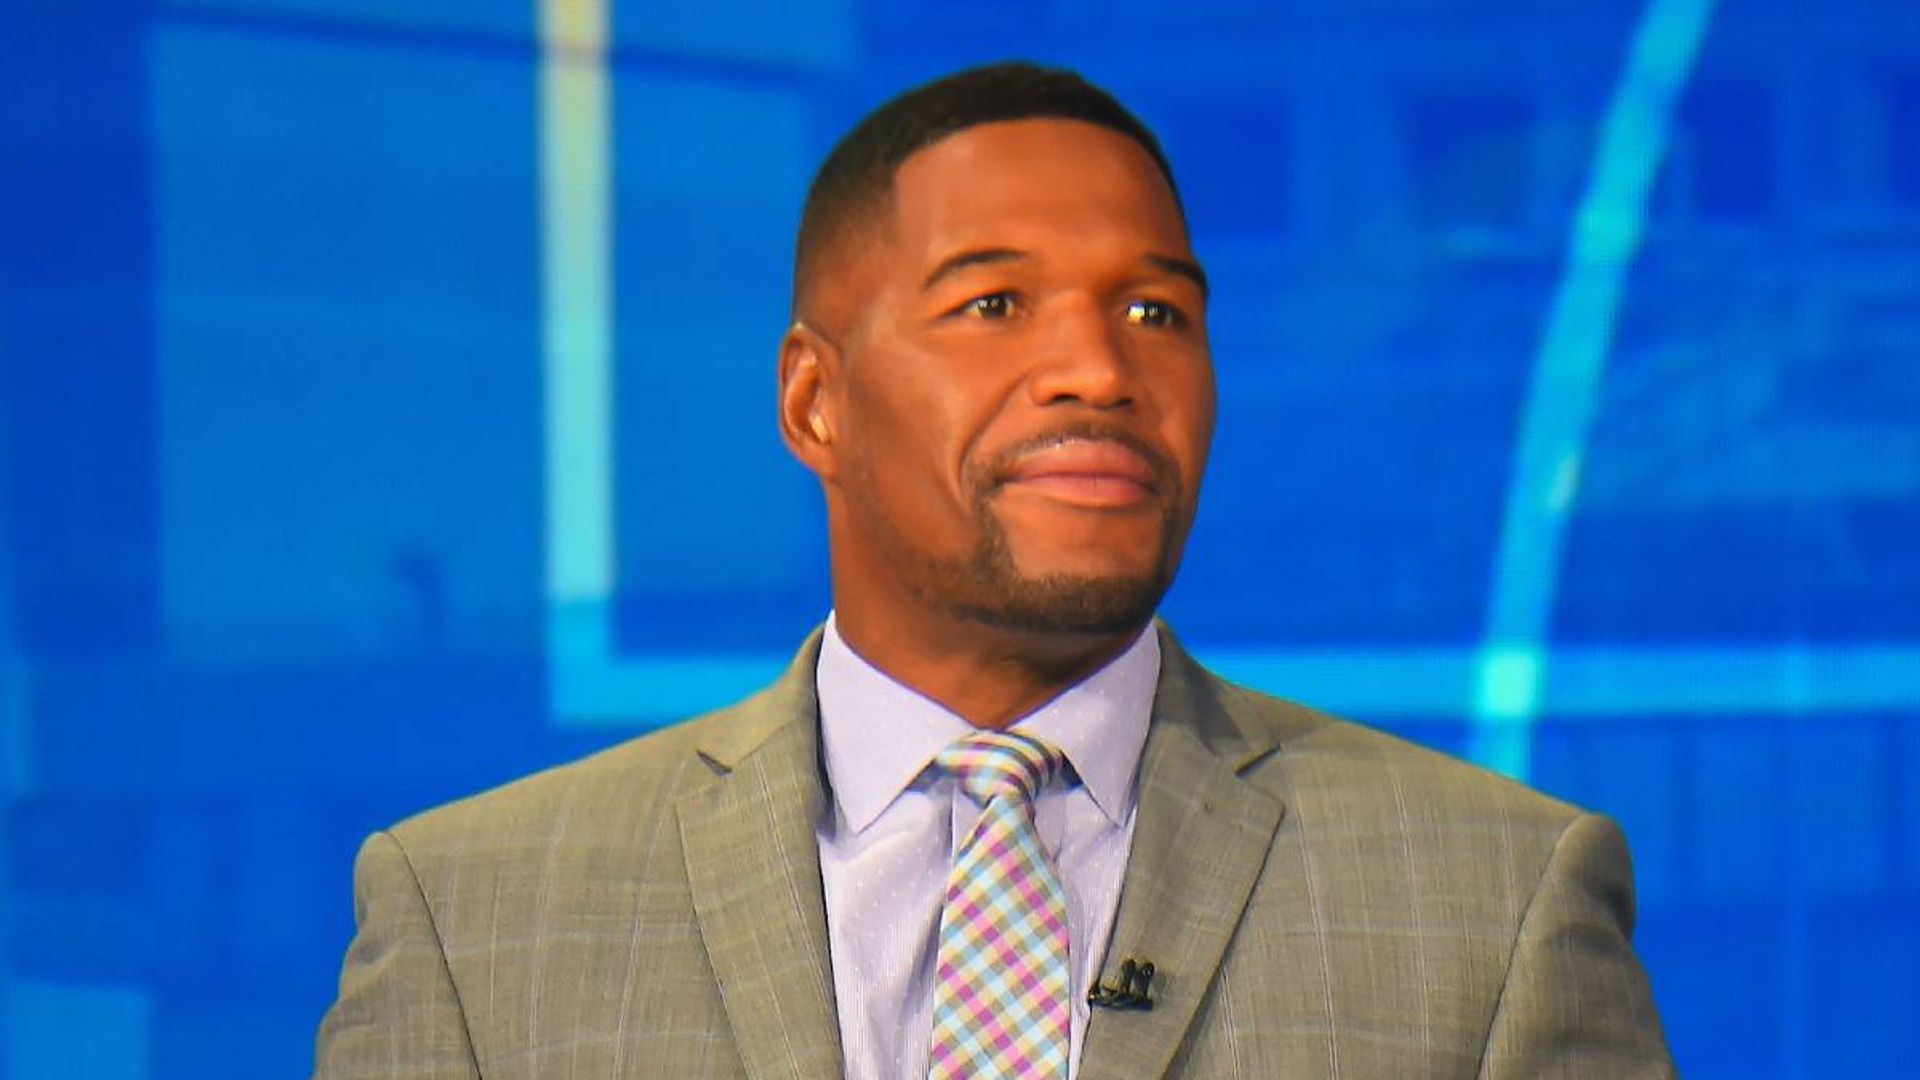 Gmas Michael Strahan Looks Back On His Career As He Prepares To Present On New Show Hello 